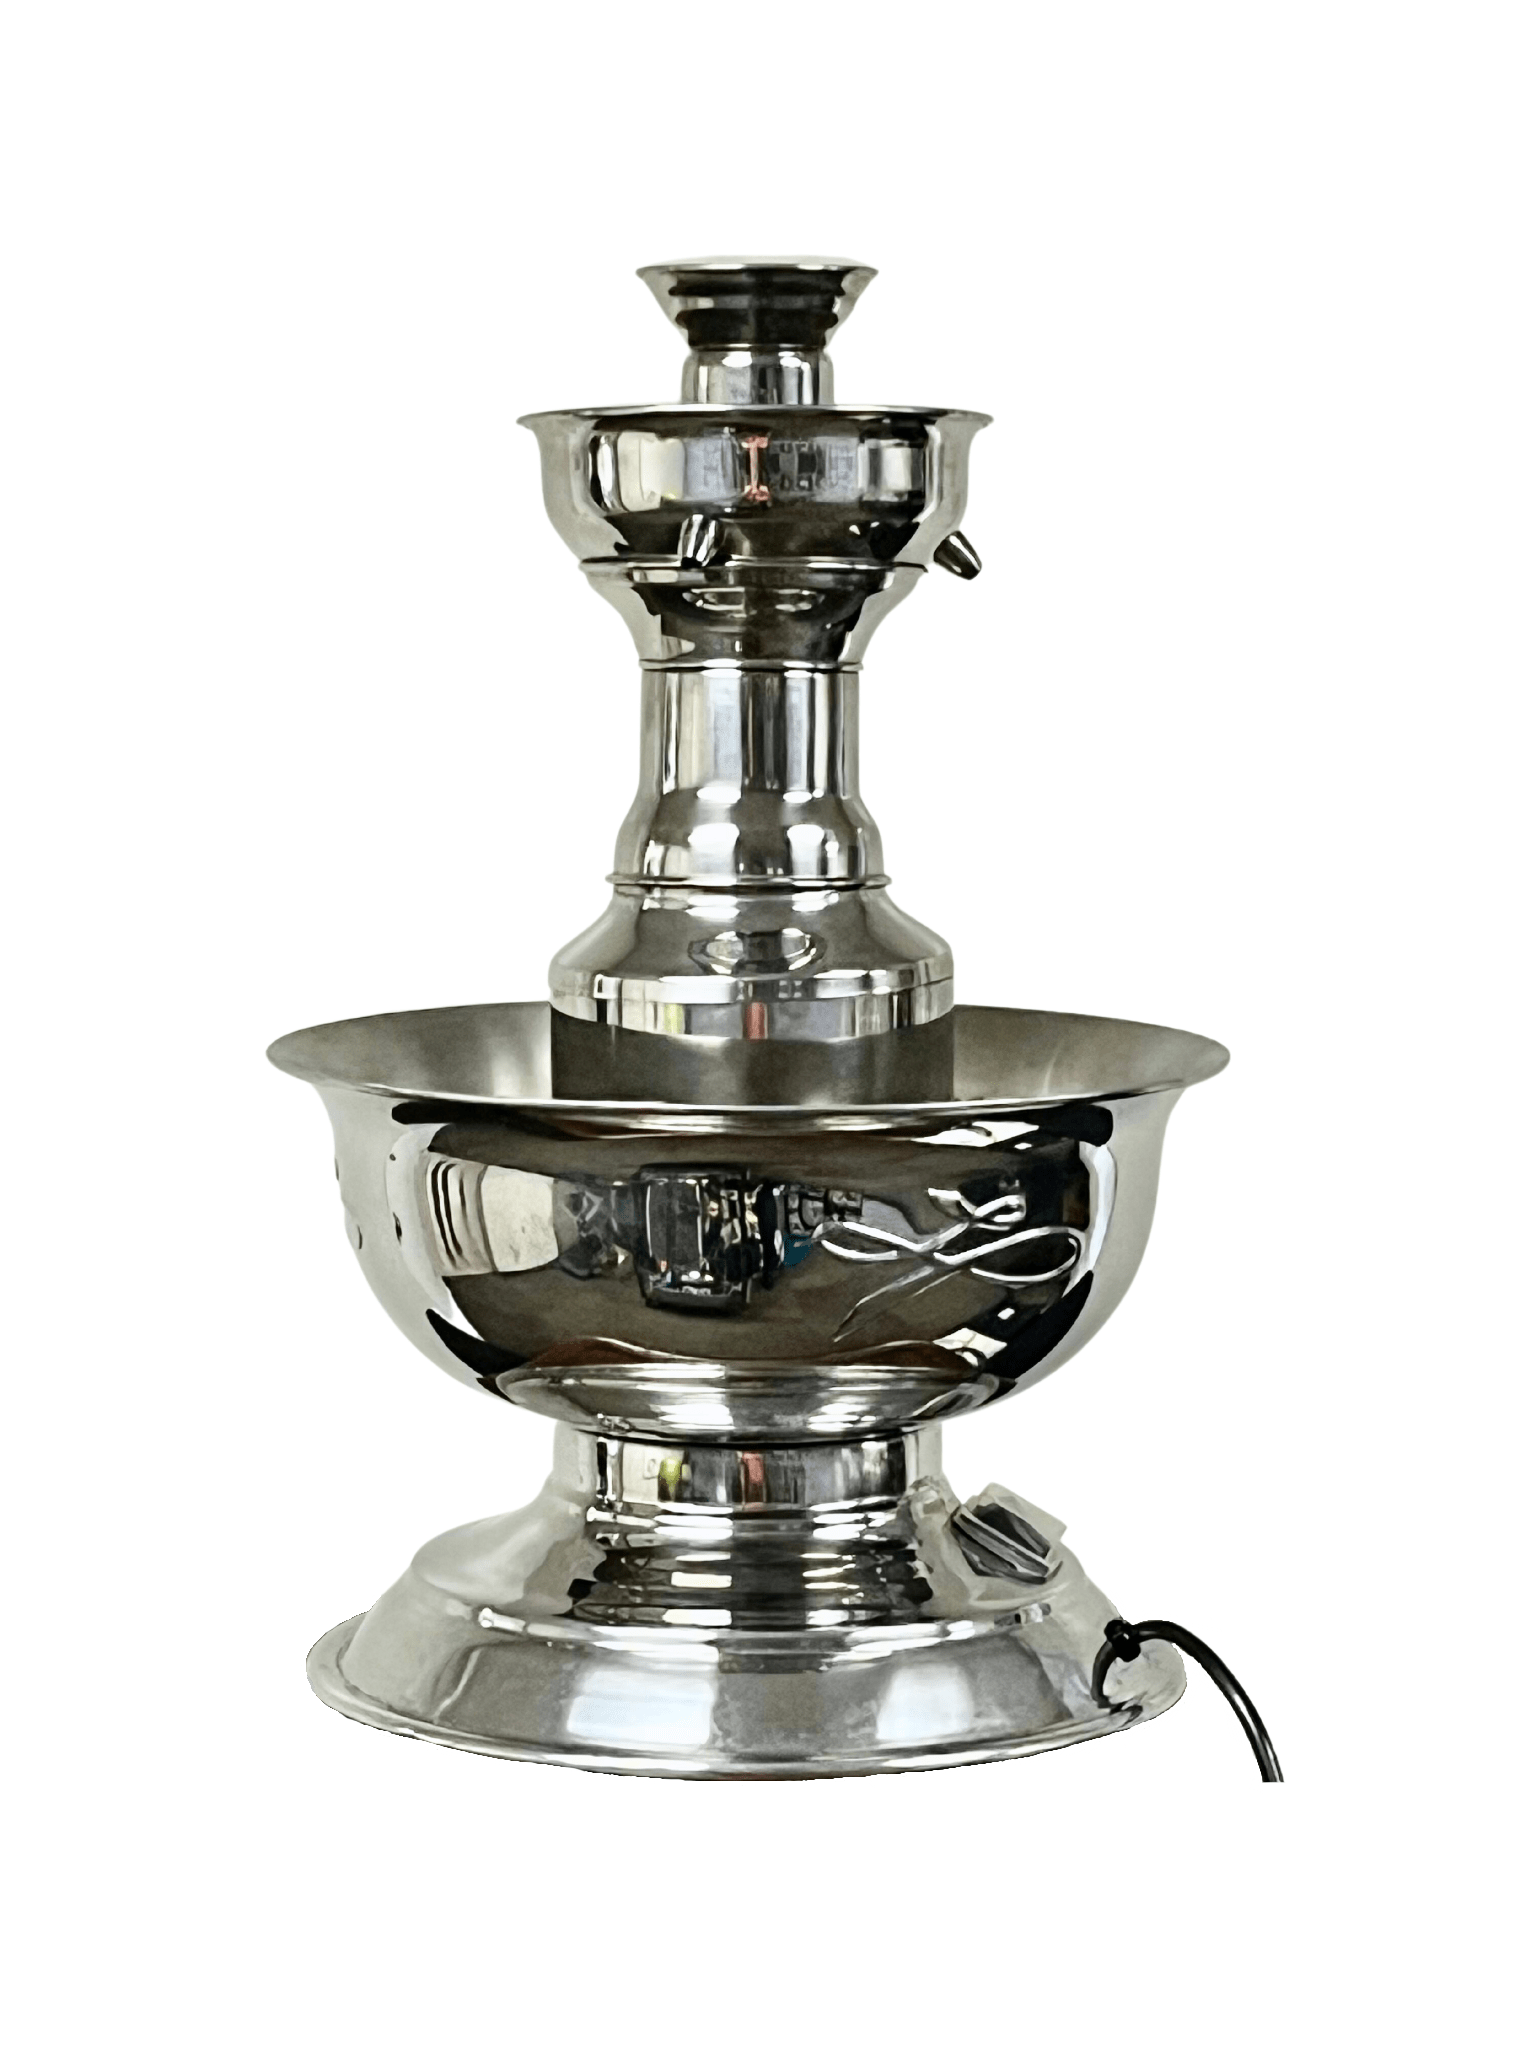 https://www.atozpartyrental.net/wp-content/uploads/2013/08/2-gallon-bevereage-fountain.png